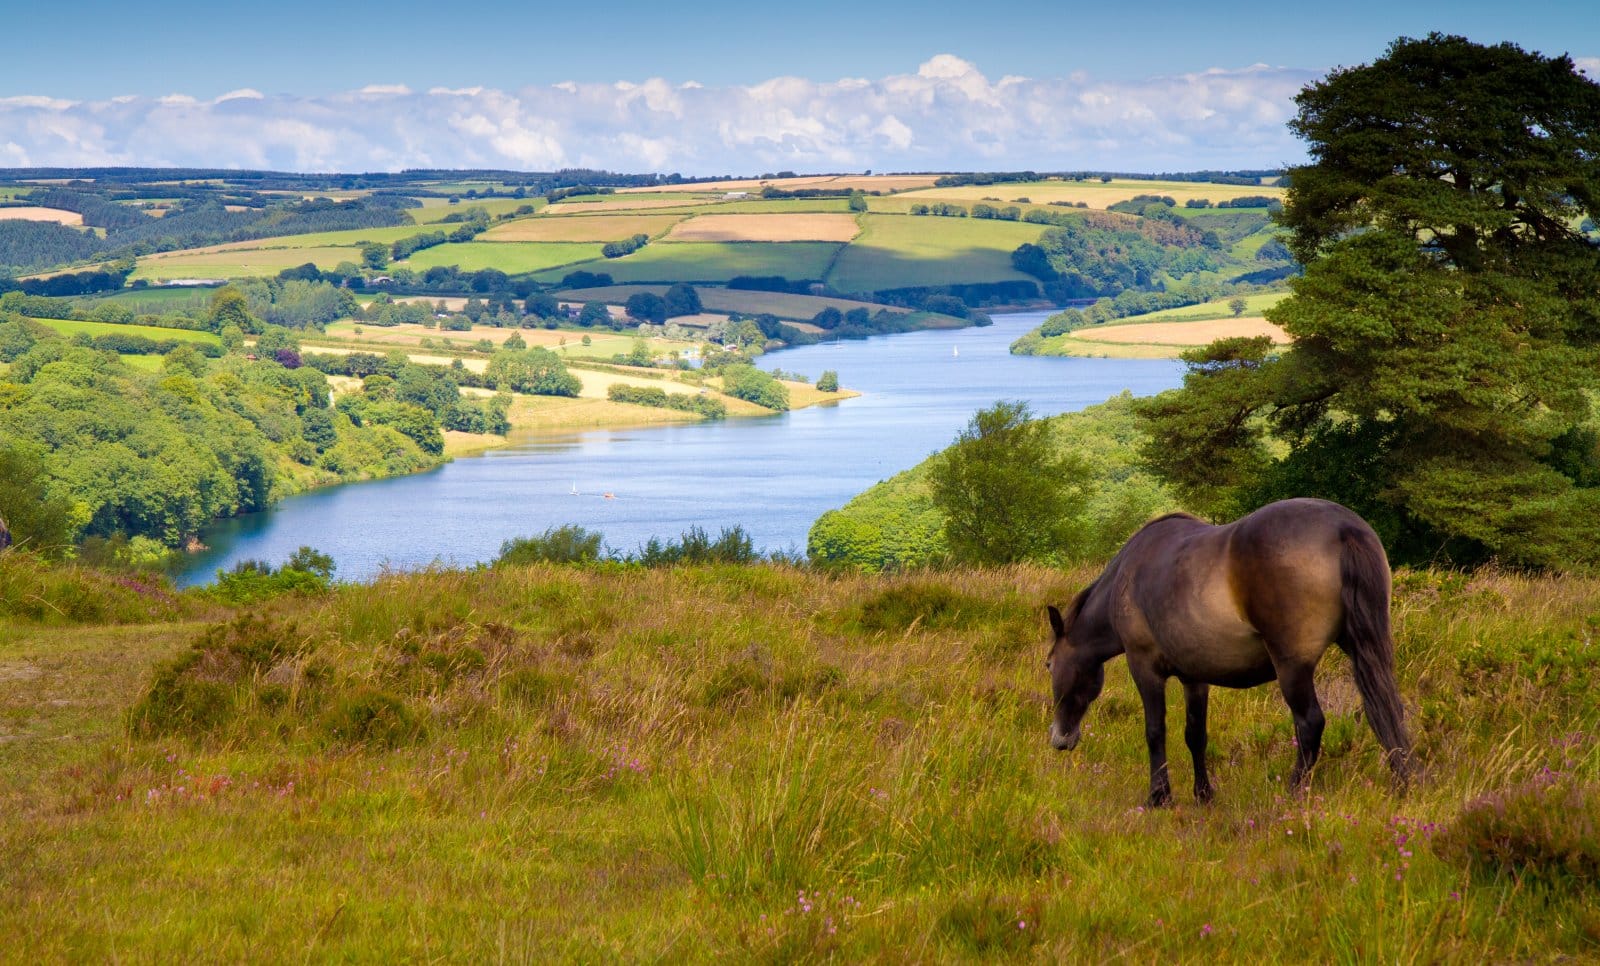 Image Credit: Shutterstock / Charlesy <p>Somerset, with its levels and moors, offers a watery landscape even before the skies open up. The local folklore is rich with tales of rains that transform paths into rivers and fields into lakes.</p>